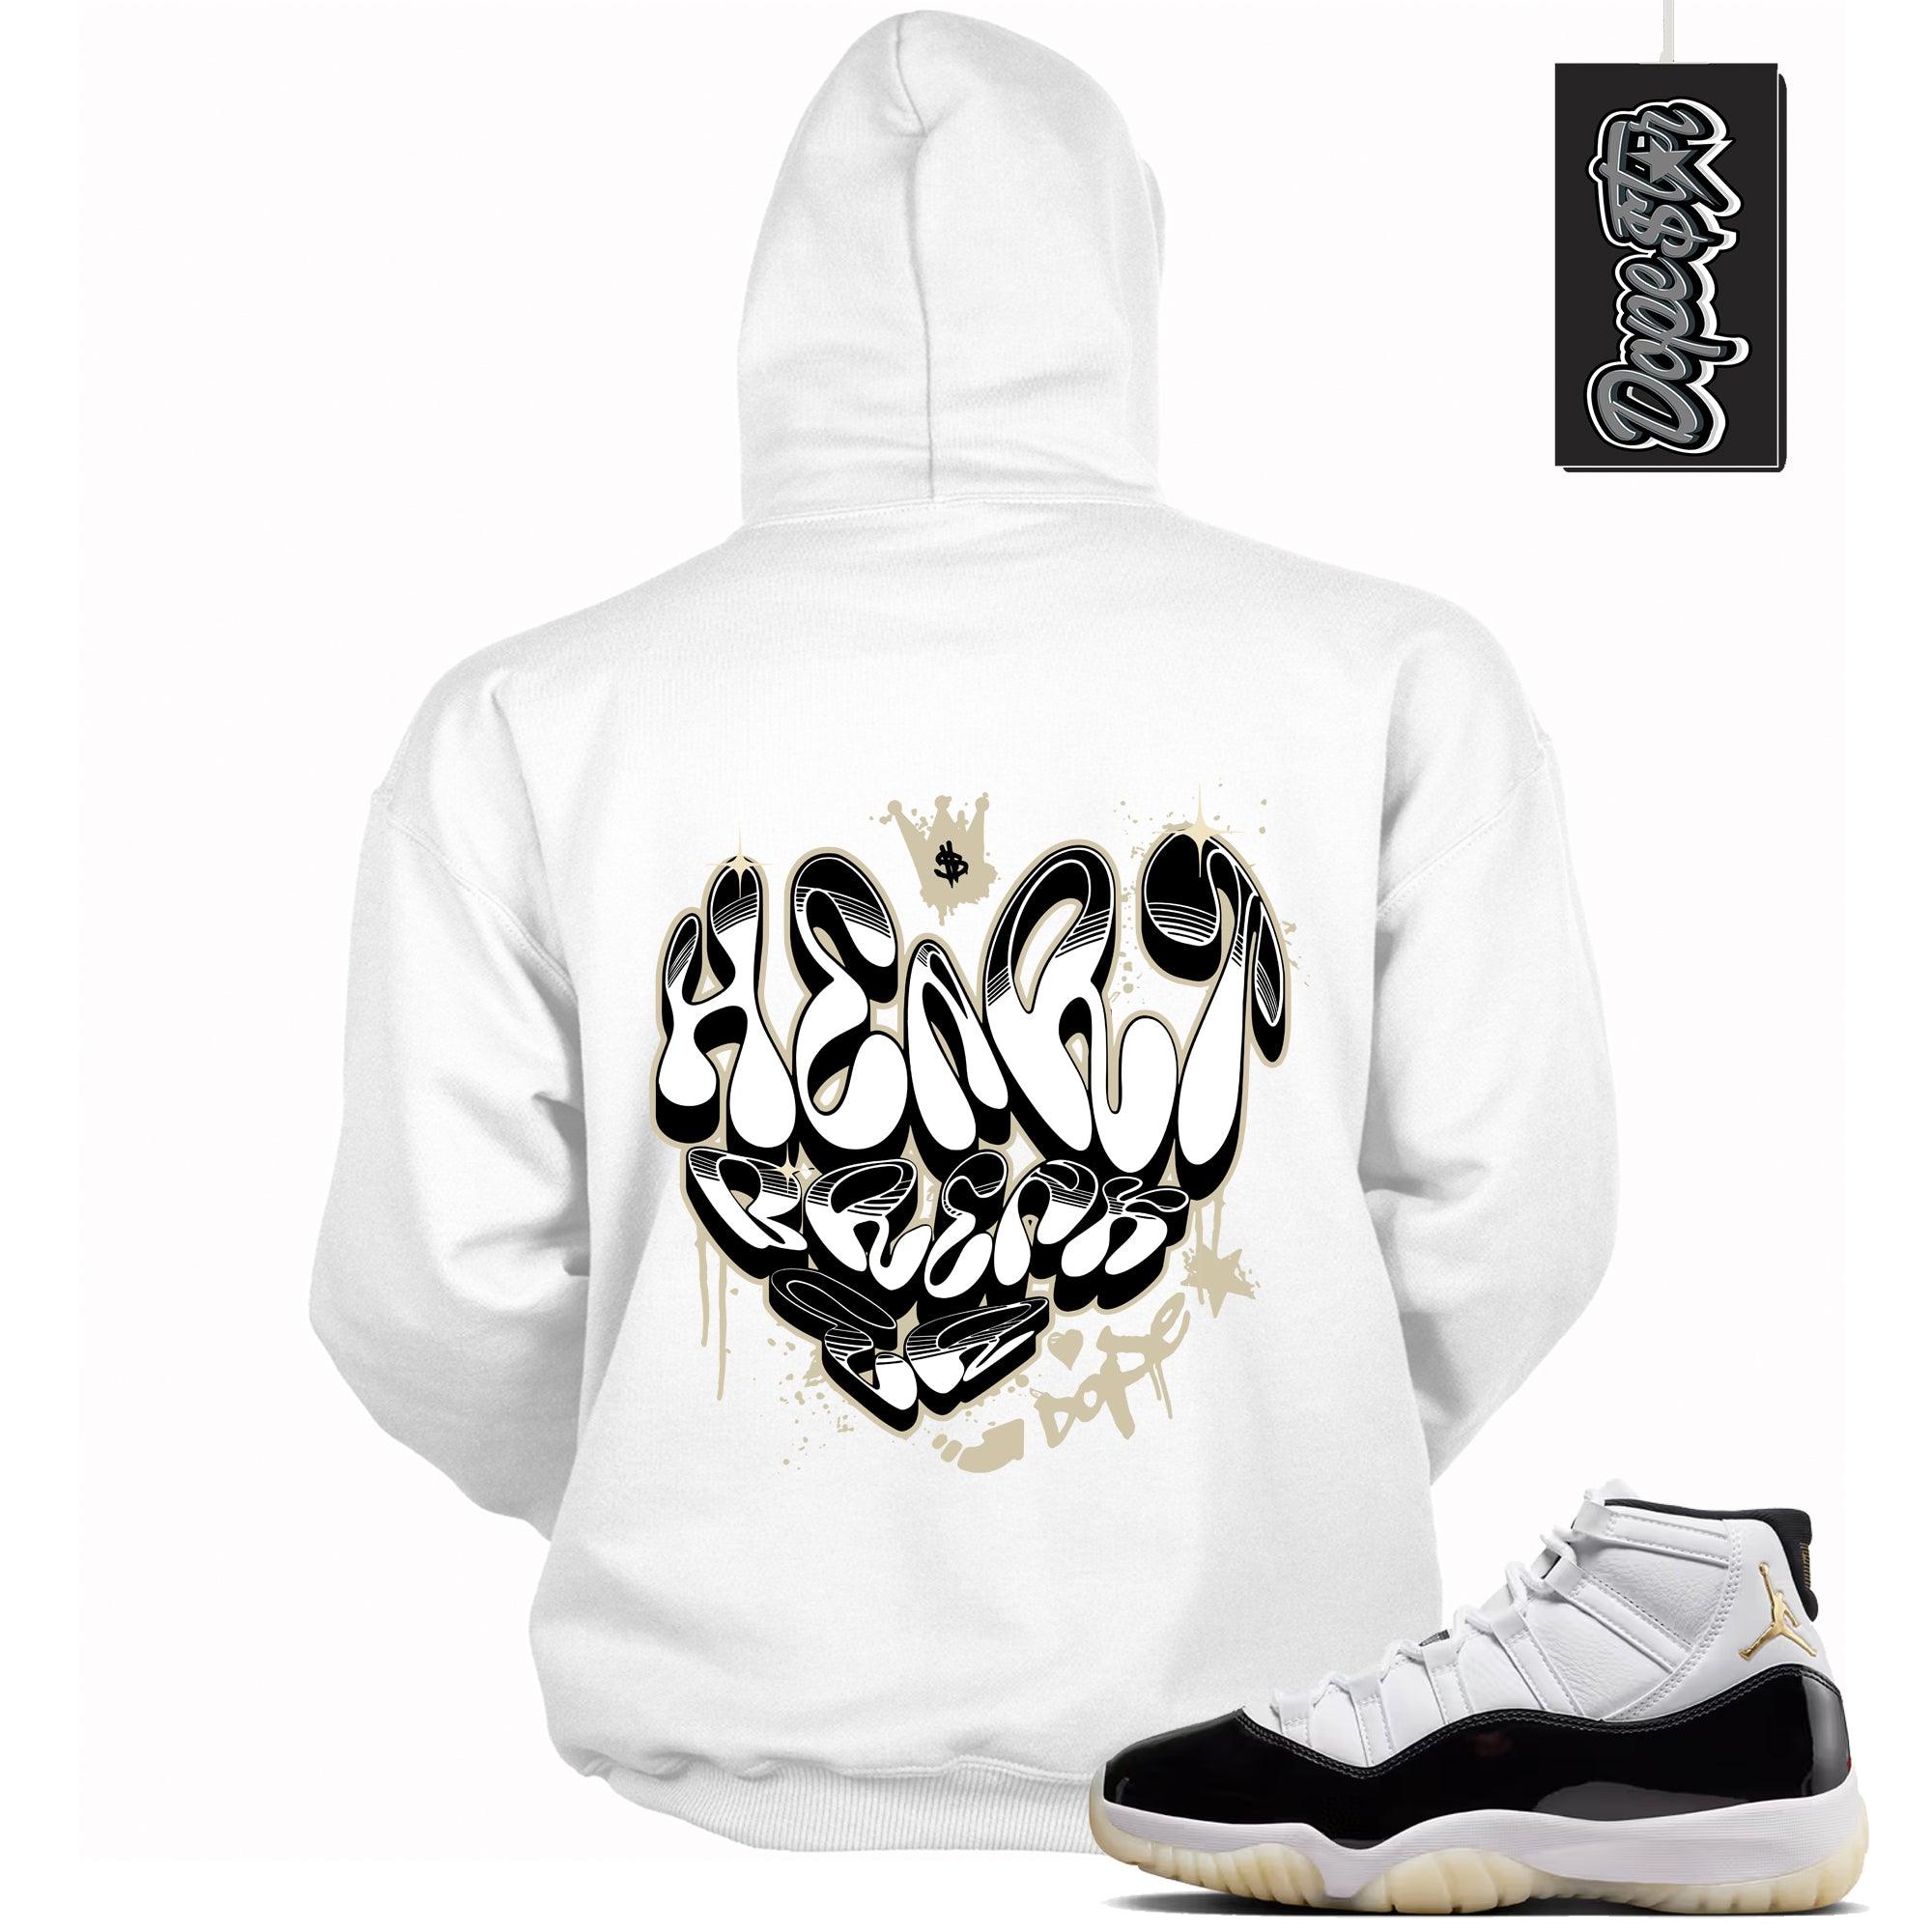 Cool White Graphic Hoodie with “ Heartbreaker Graffiti “ print, that perfectly matches AIR JORDAN 11 RETRO GRATITUDE sneakers